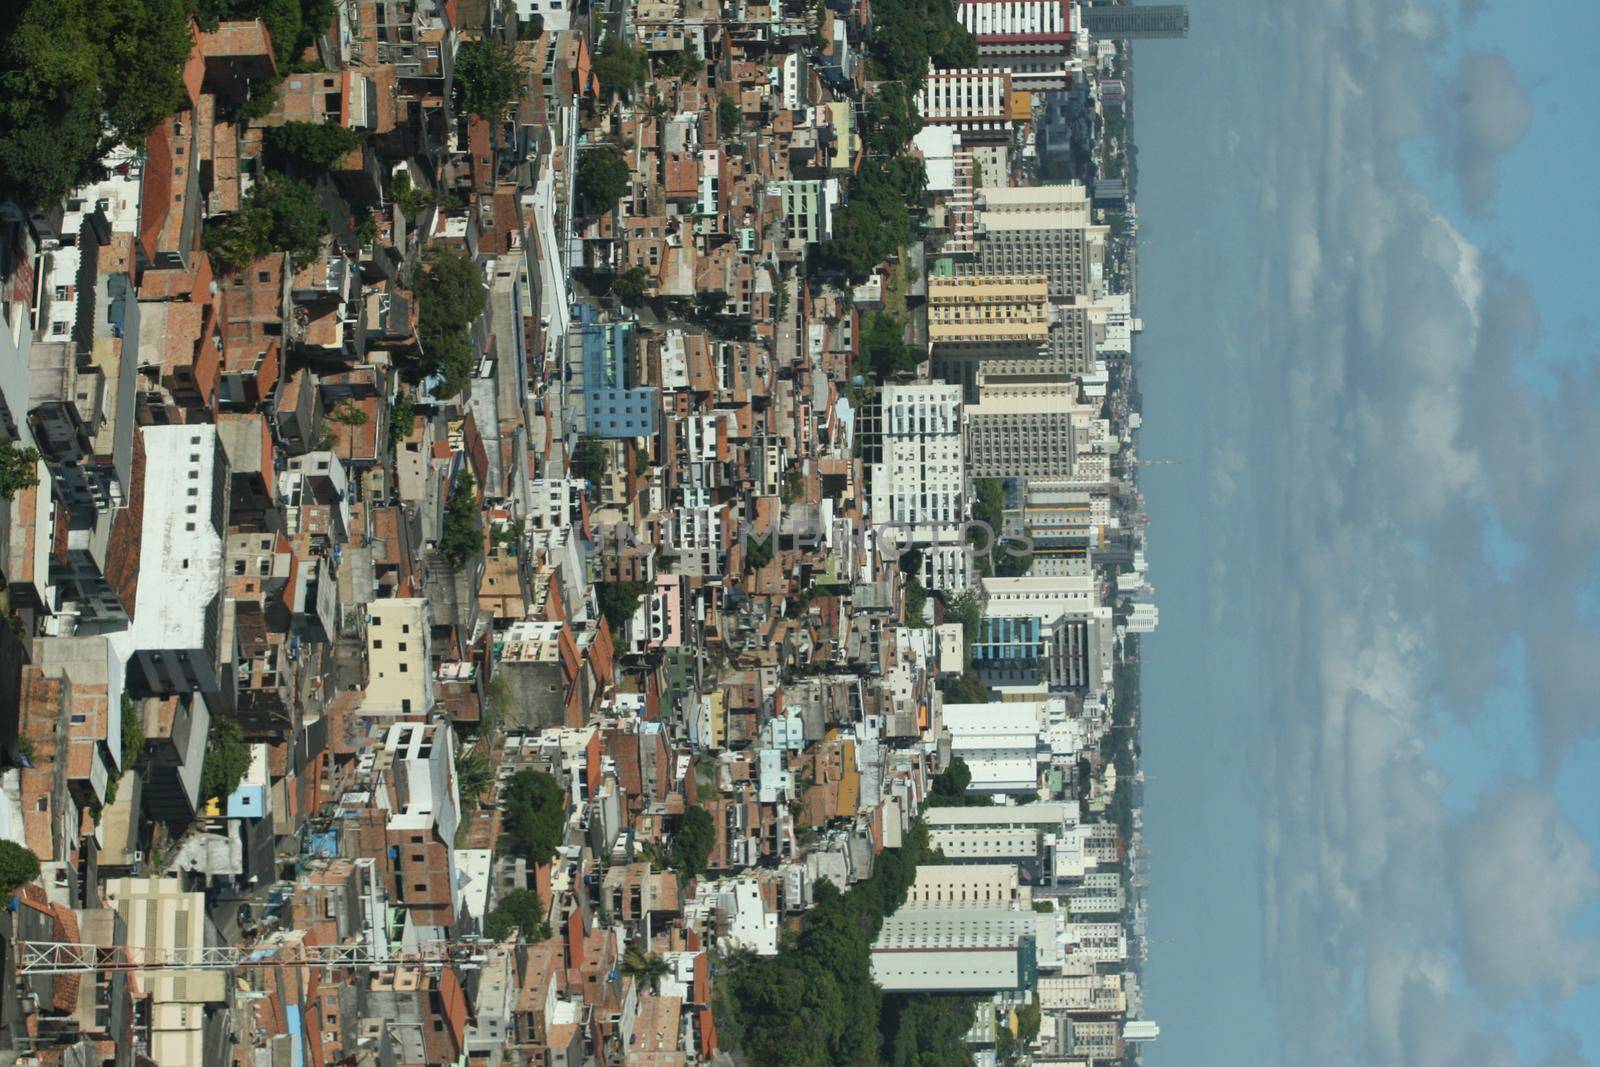 salvador, bahia / brazil  - january 26, 2017: Aerial view of residential real estate between the neighborhoods of Brotas and Federacao in the city of Salvador.